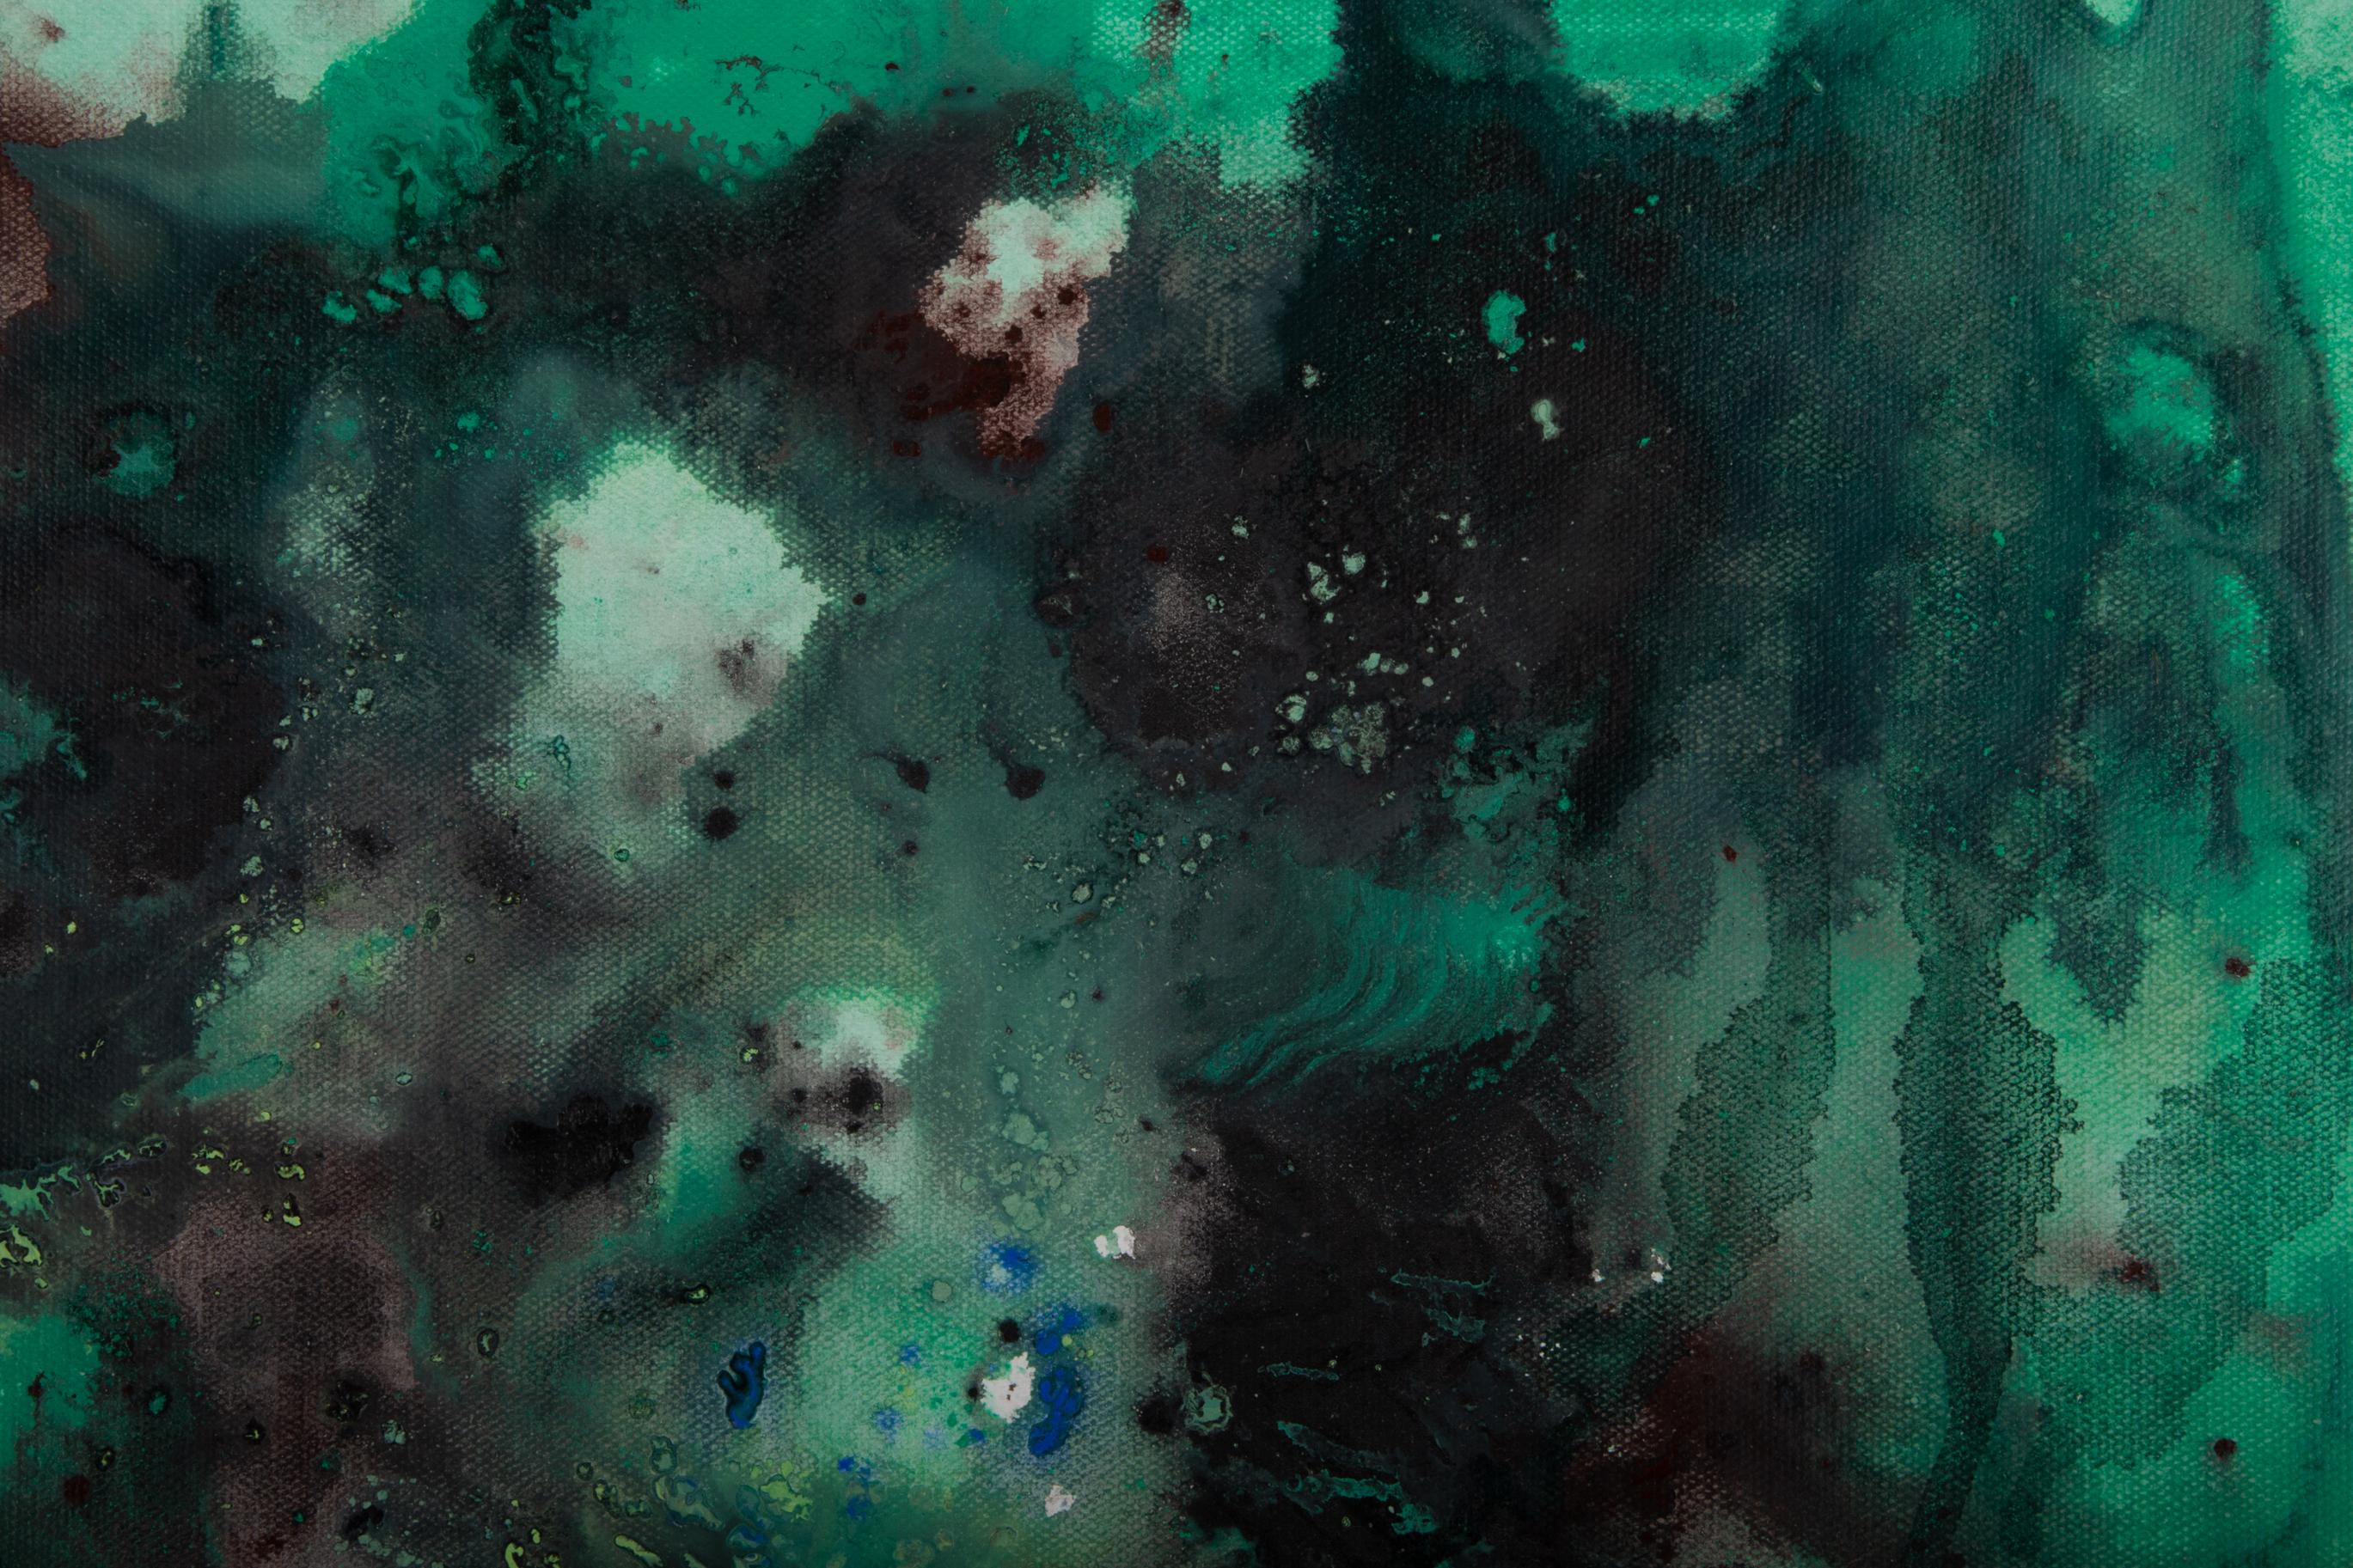 Chong Liu Abstract Original Oil On Canvas The Beginning Of Nature-Green In Black For Sale 2